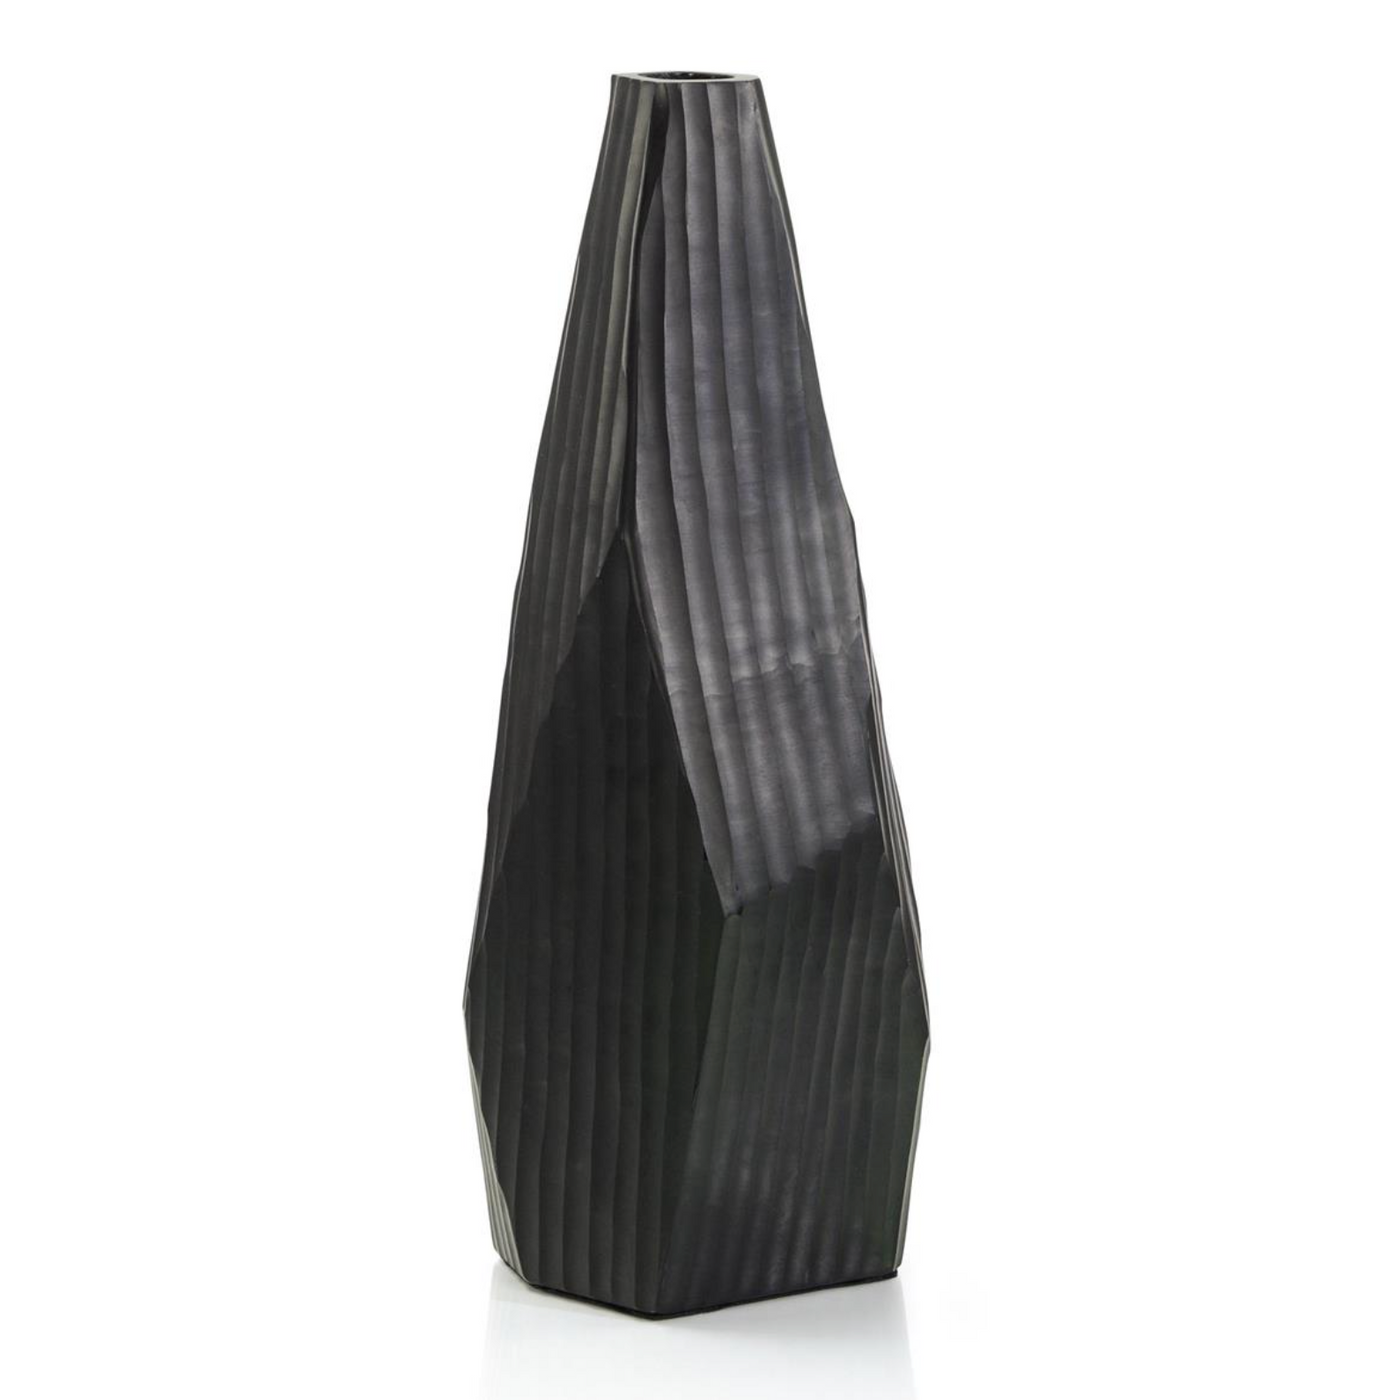 VASE VERTICAL ETCHINGS BLACK (Available in 2 Sizes)